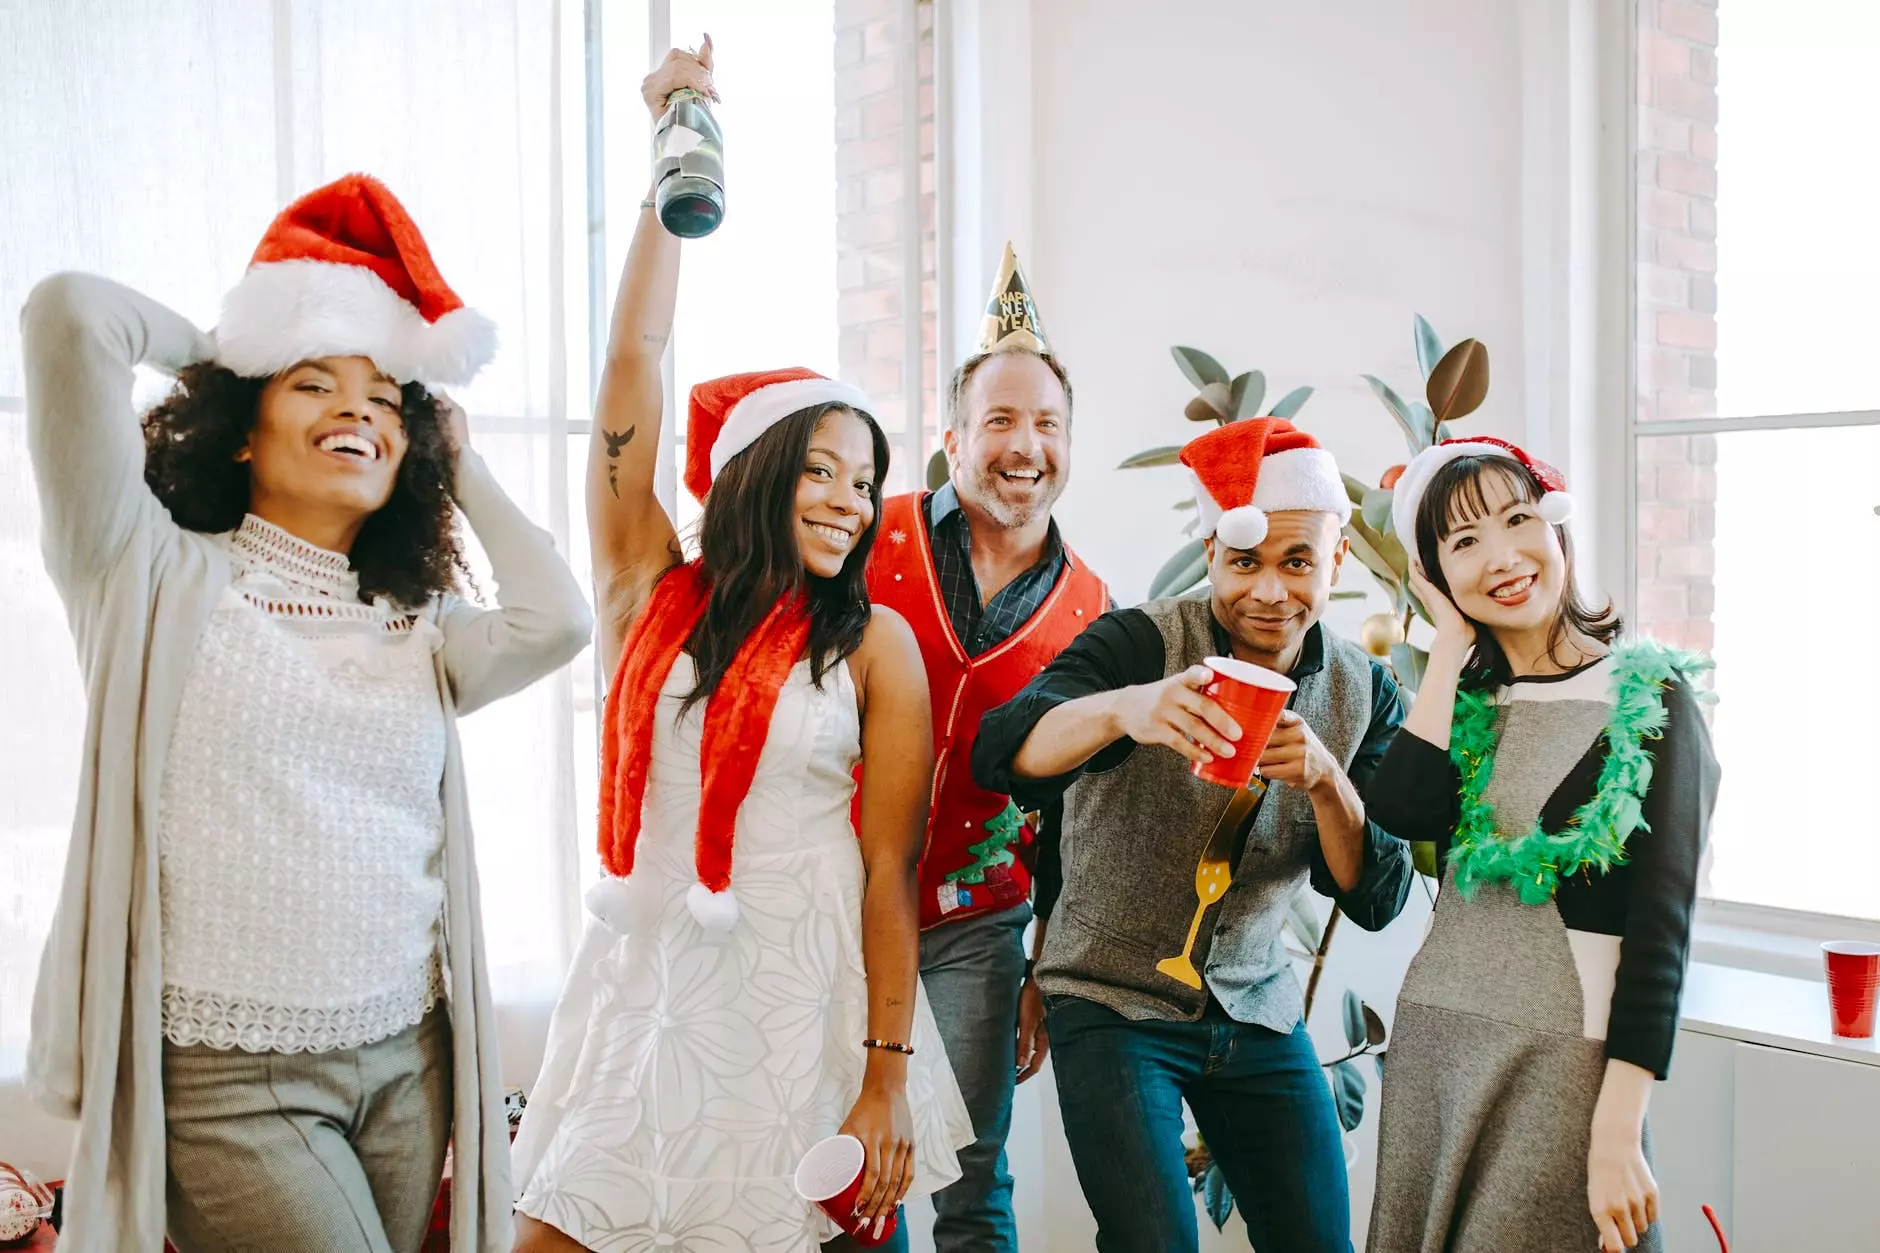 How Do You Make a Successful Christmas Party?